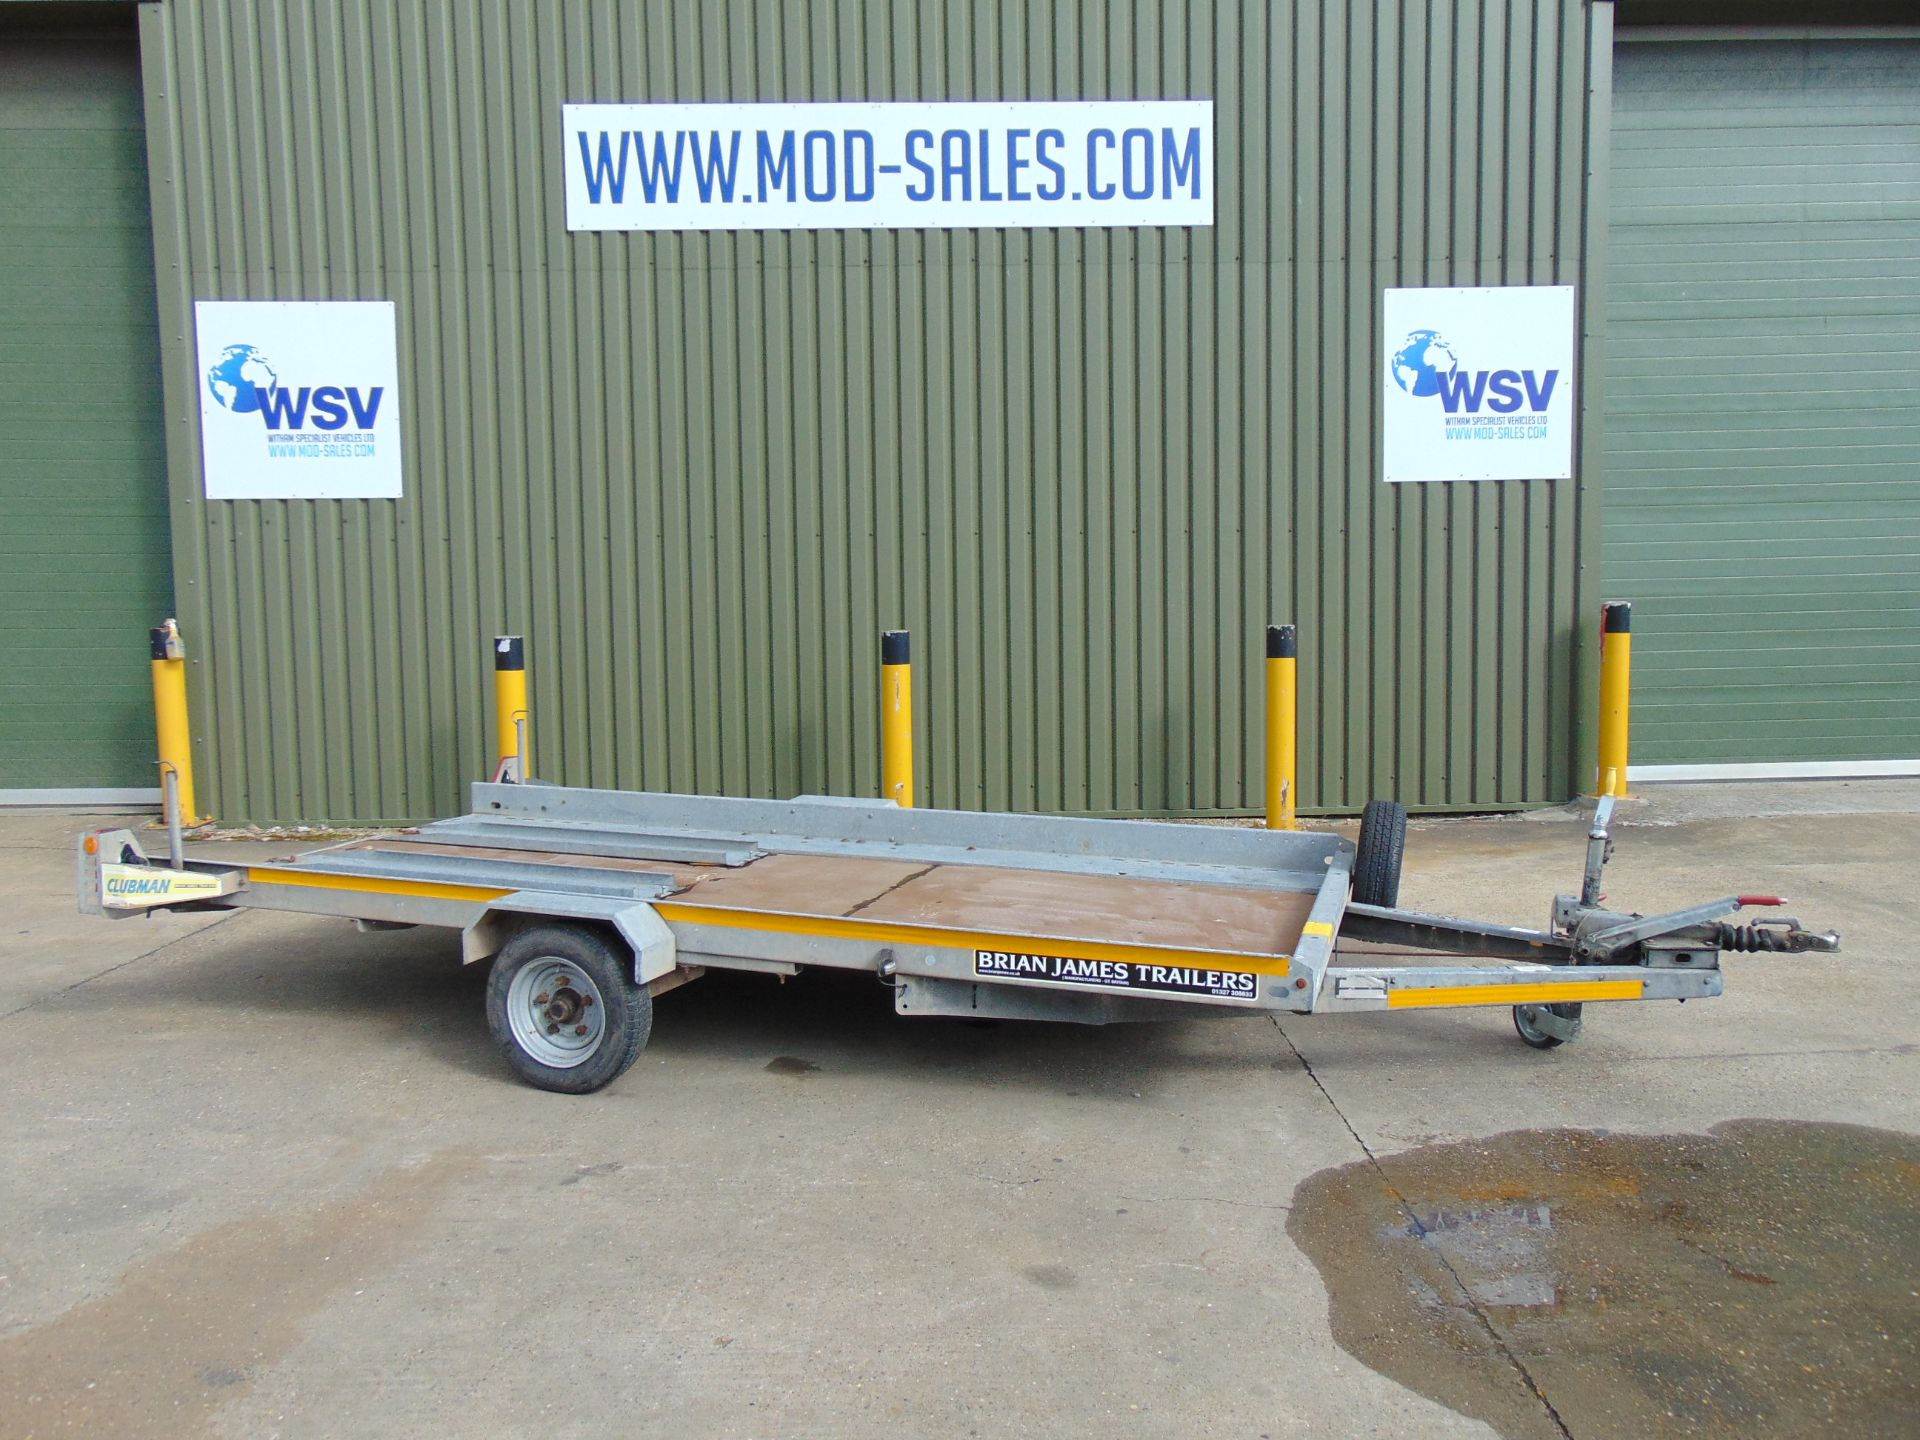 Brian James Clubman Single Axle Car Transporter Trailer with Ramps